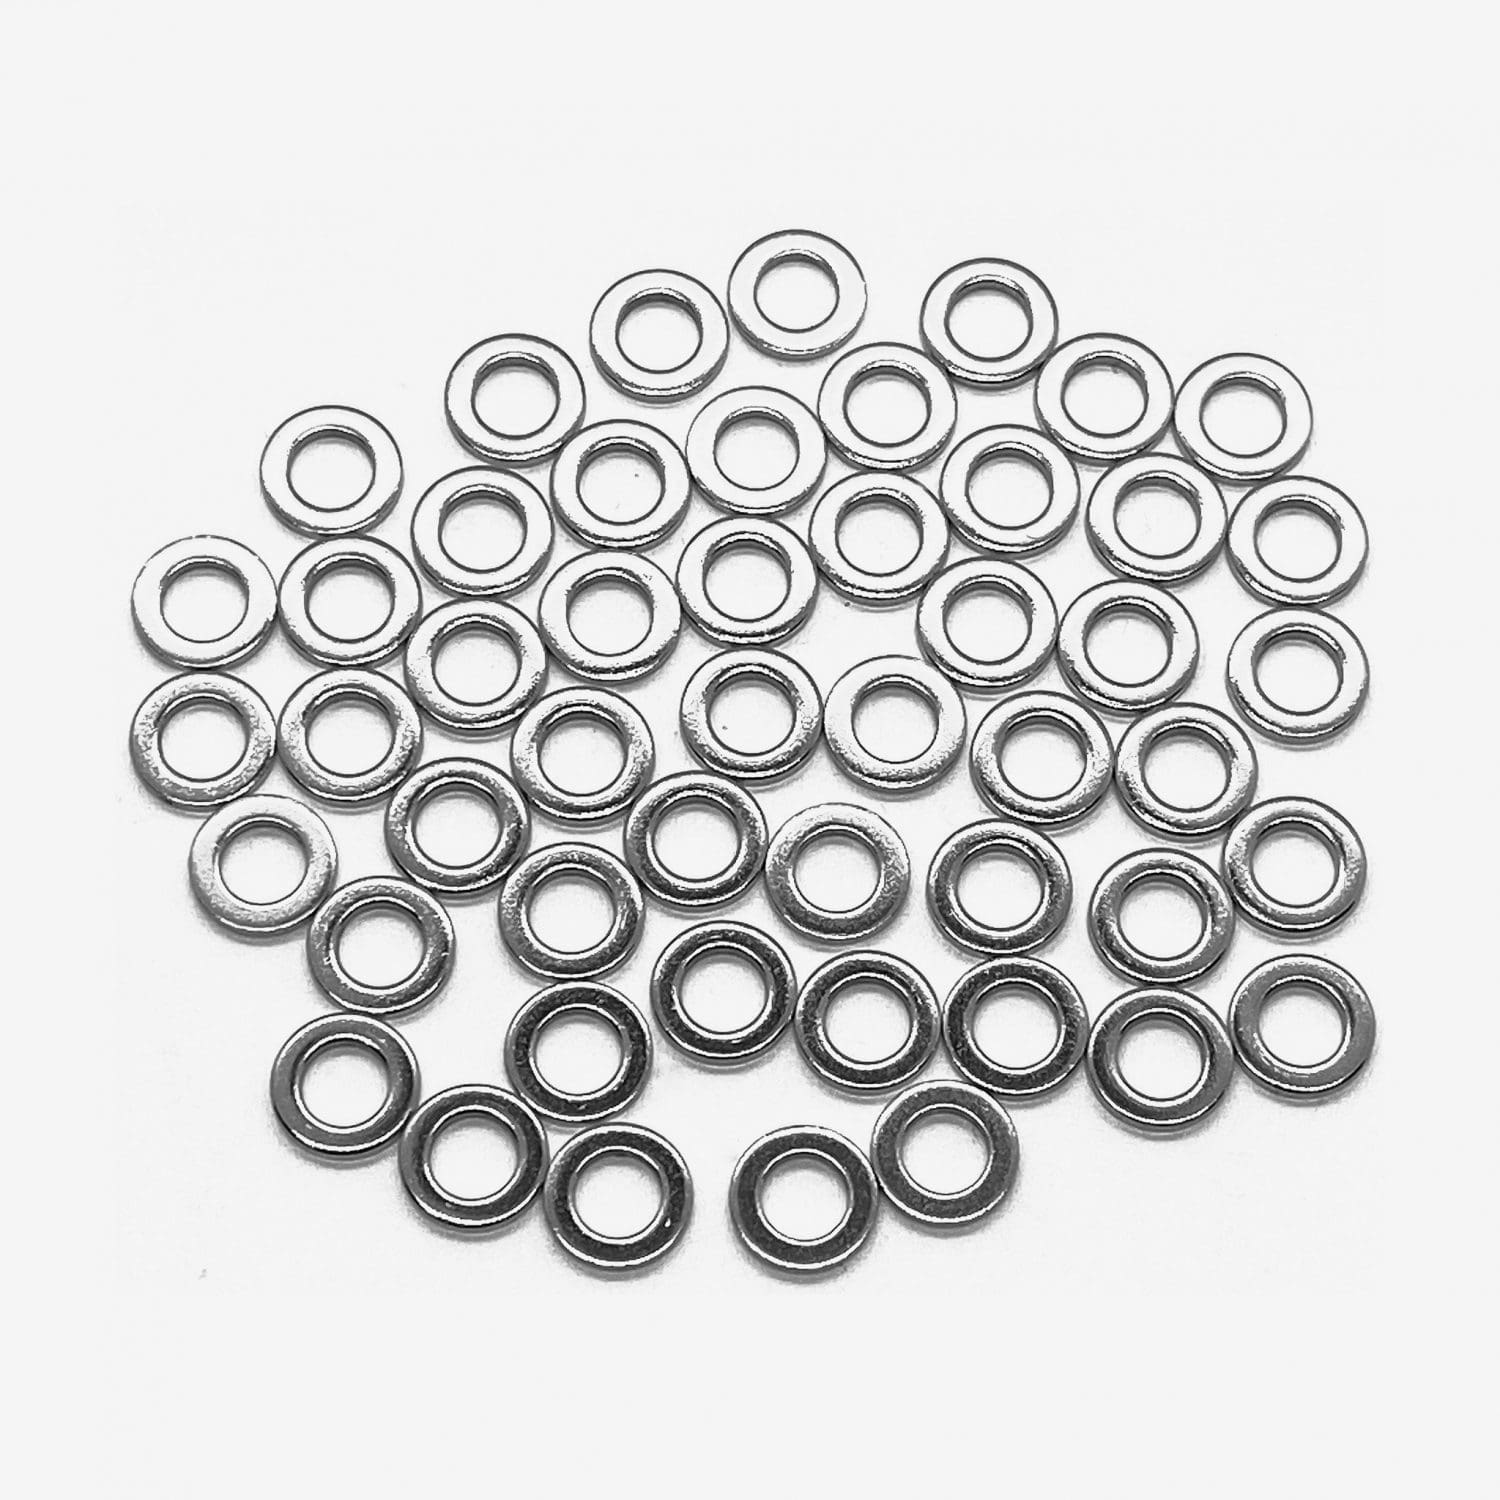 50-Pack Tension Rod Washers